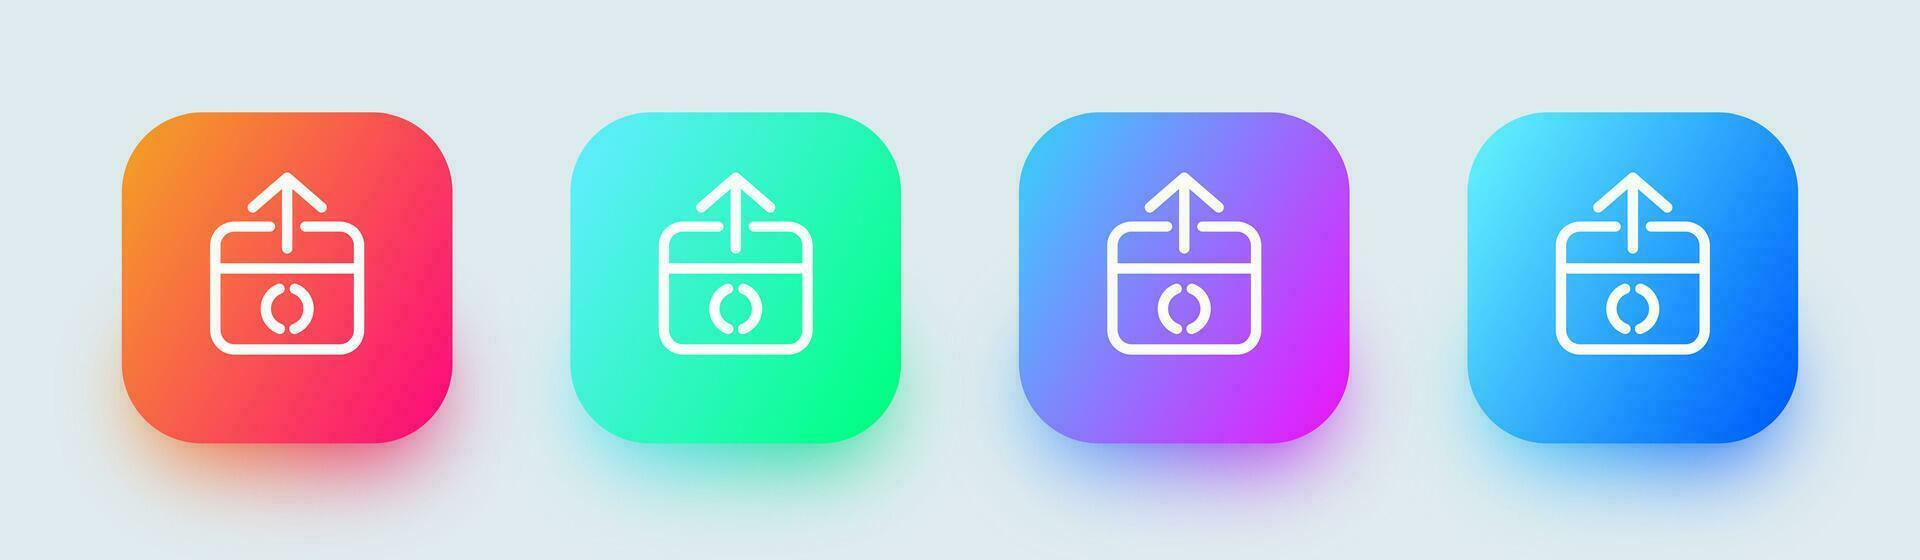 Output line icon in square gradient colors. Quit signs vector illustration.